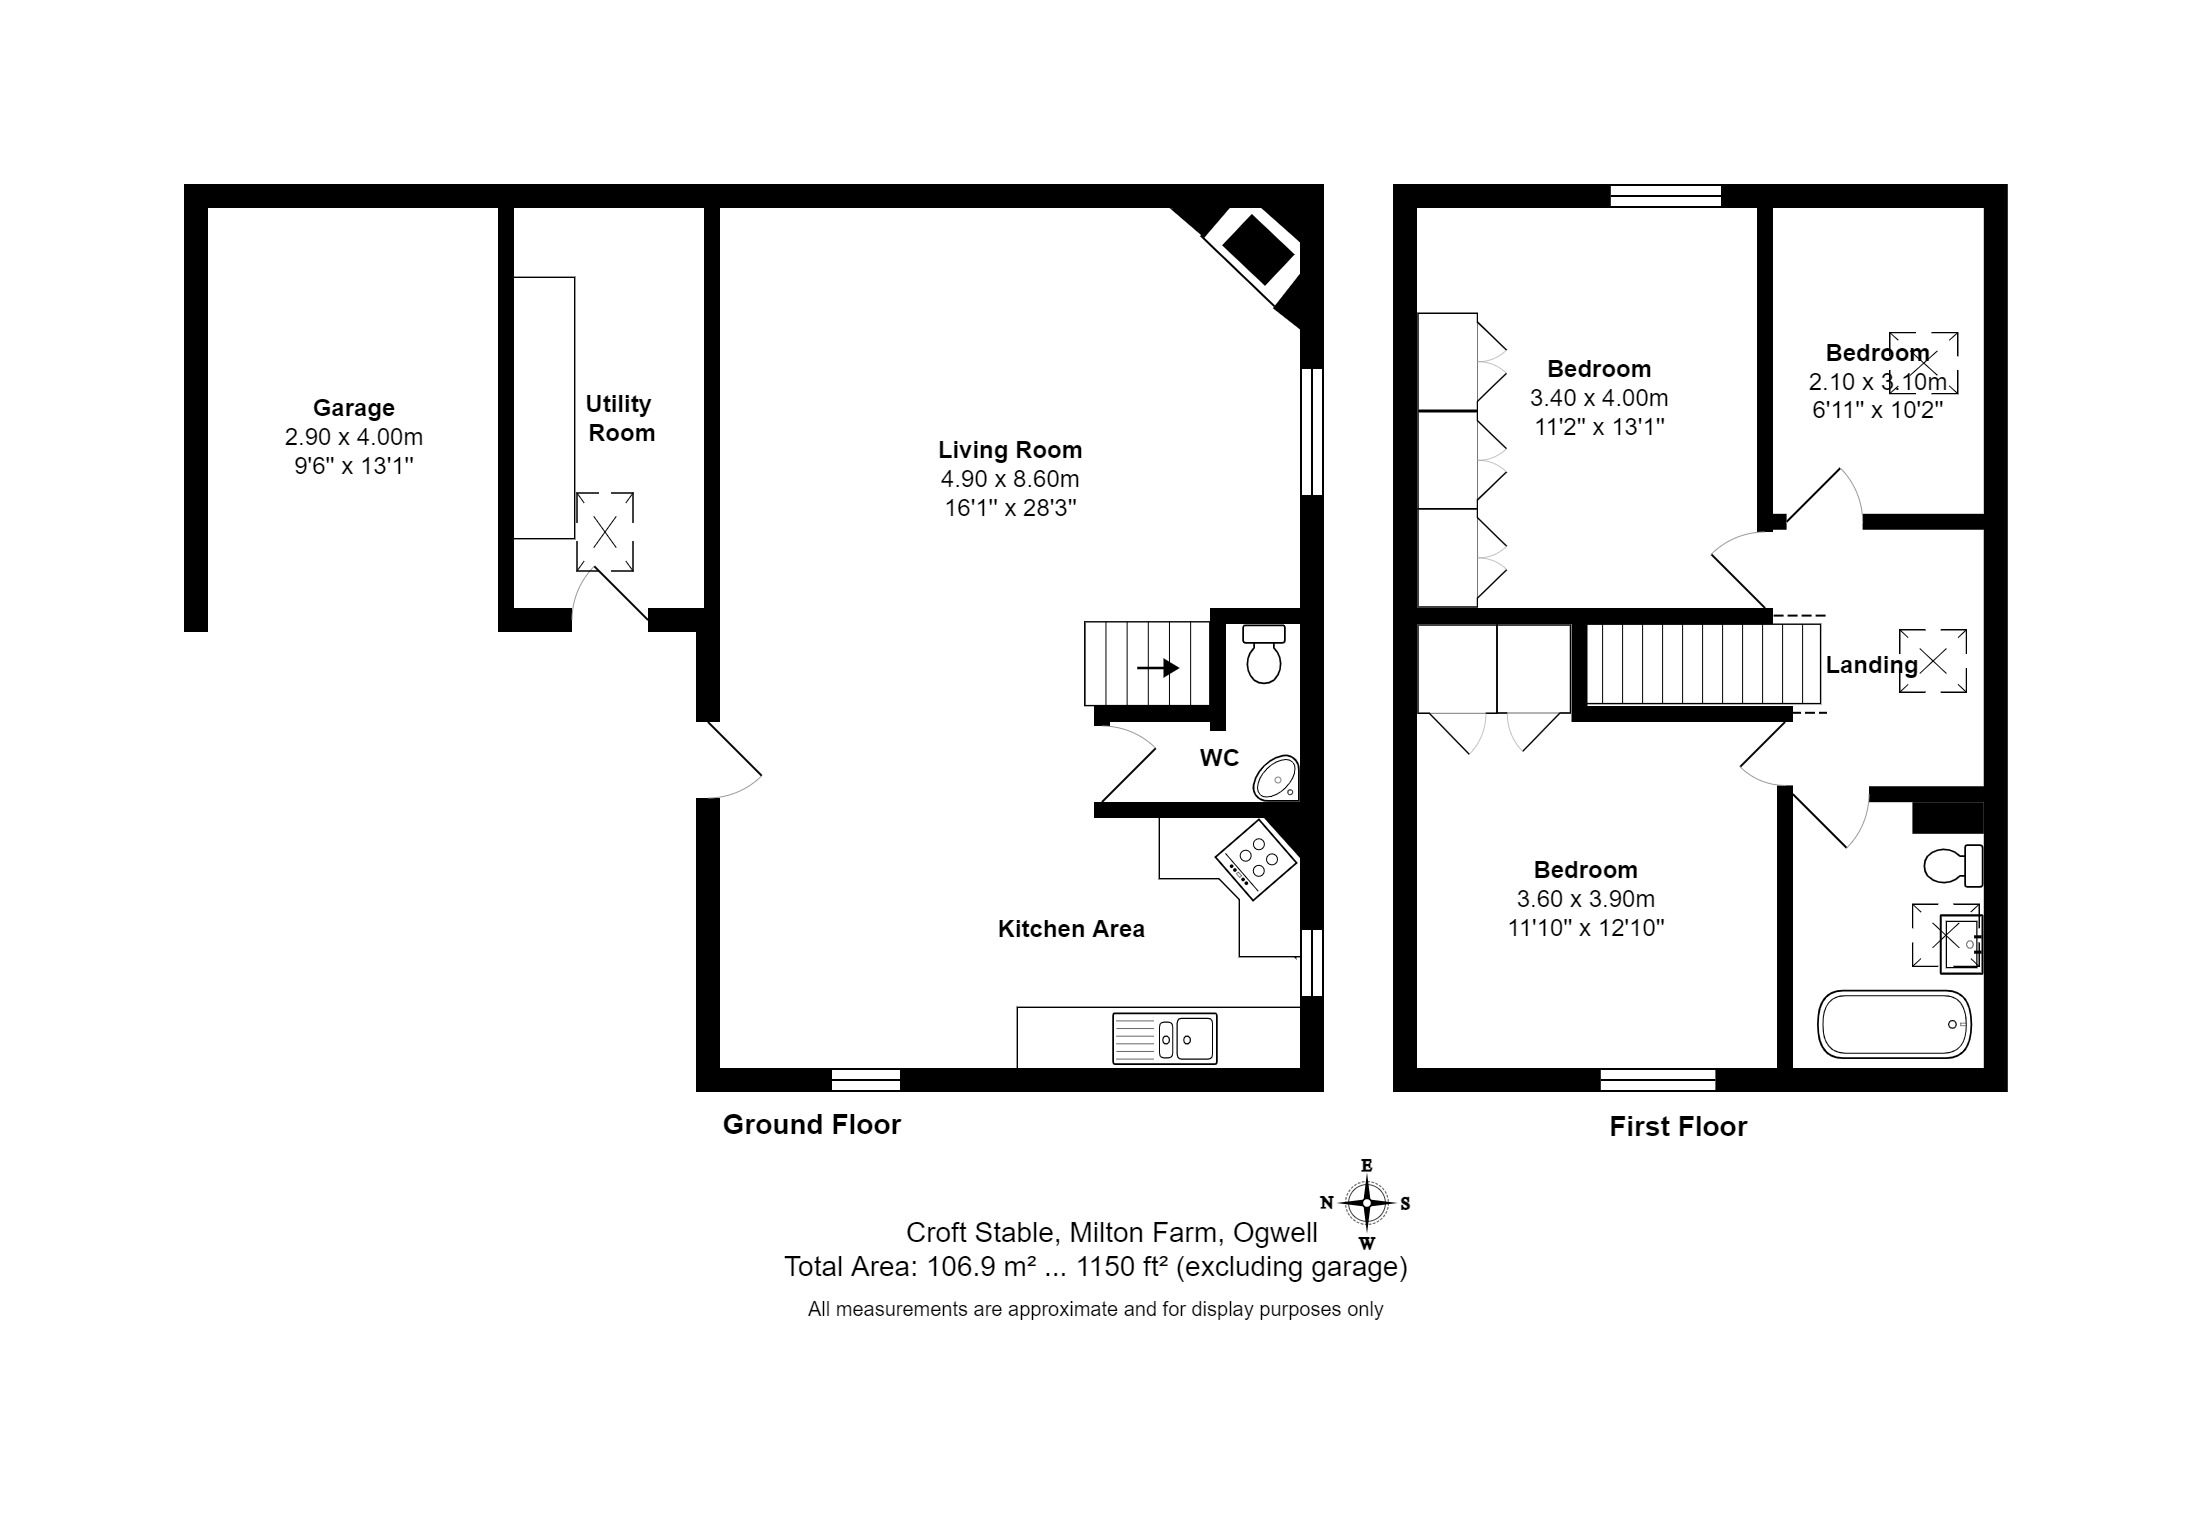 3 bed barn conversion for sale in Milton Farm, Ogwell - Property floorplan